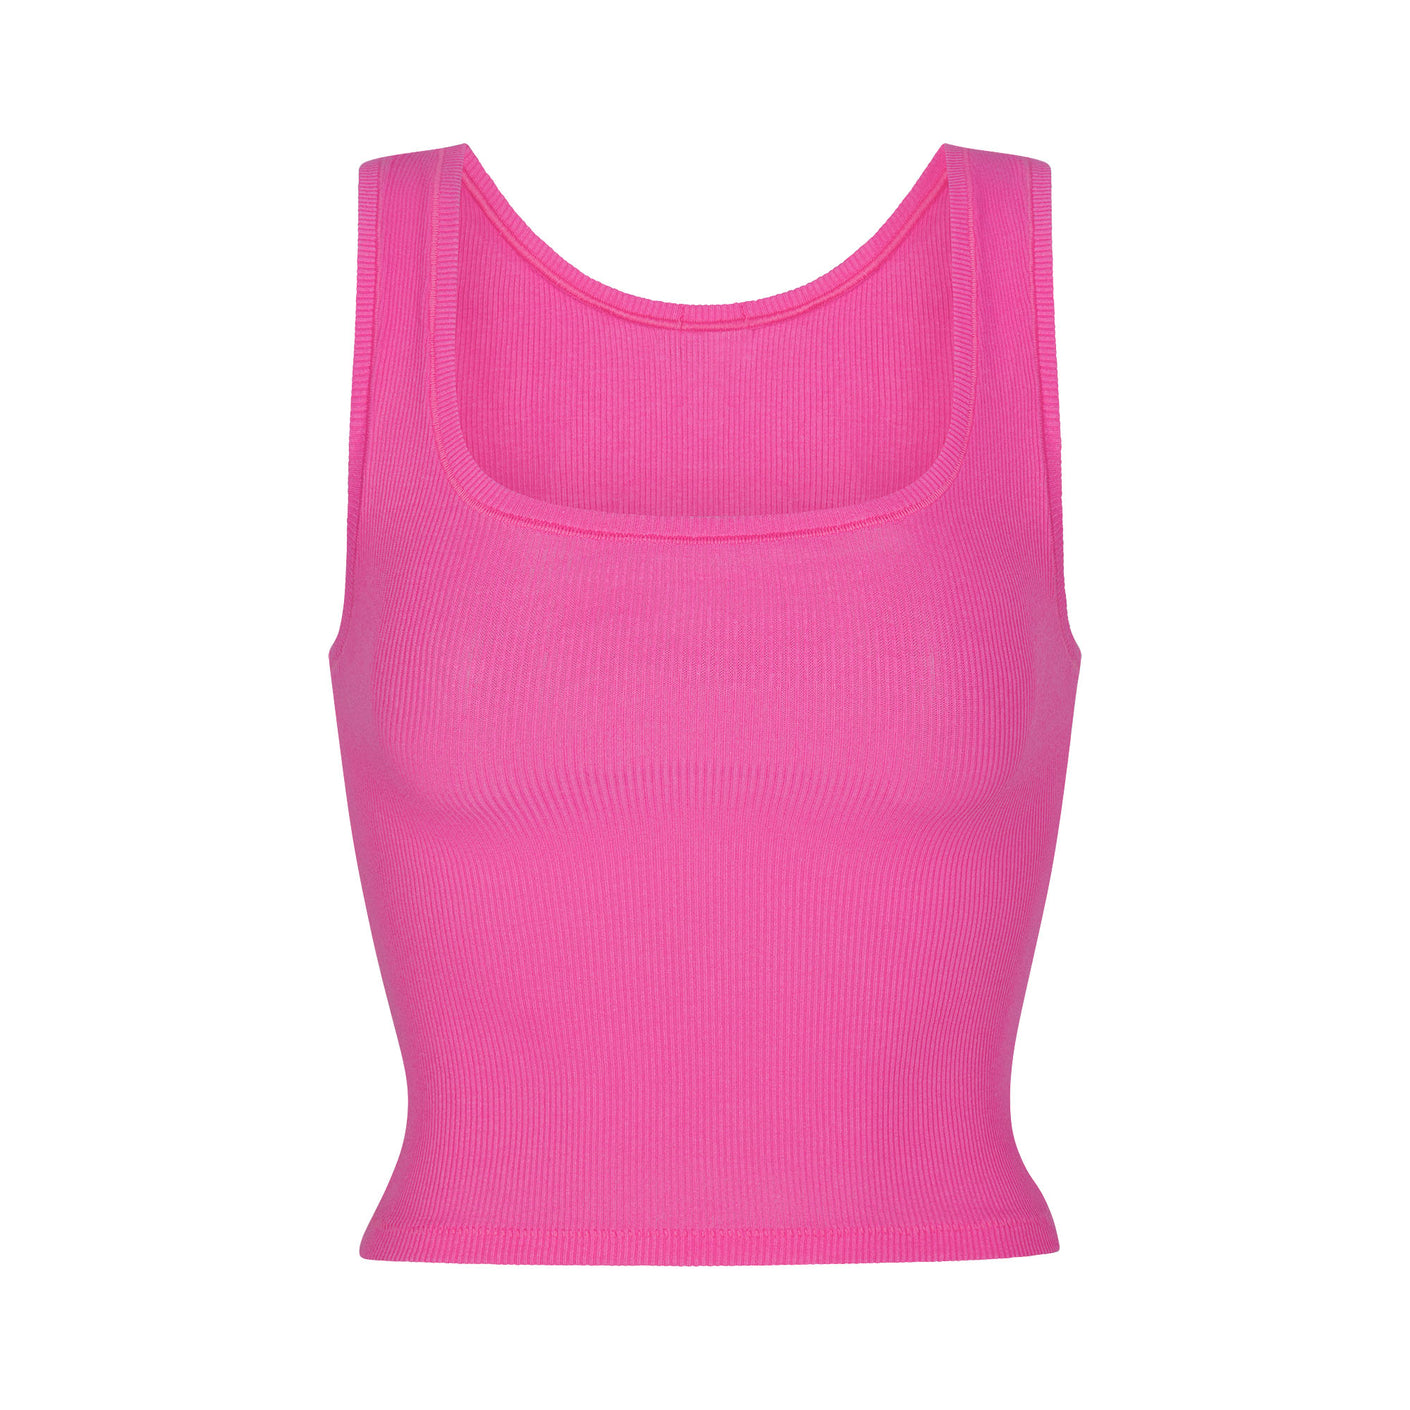 discounted store‎ Medium LIMITED EDITION SKIMS RASPBERRY PINK RIBBED SET  TANK TOP AND SHORTS NWT